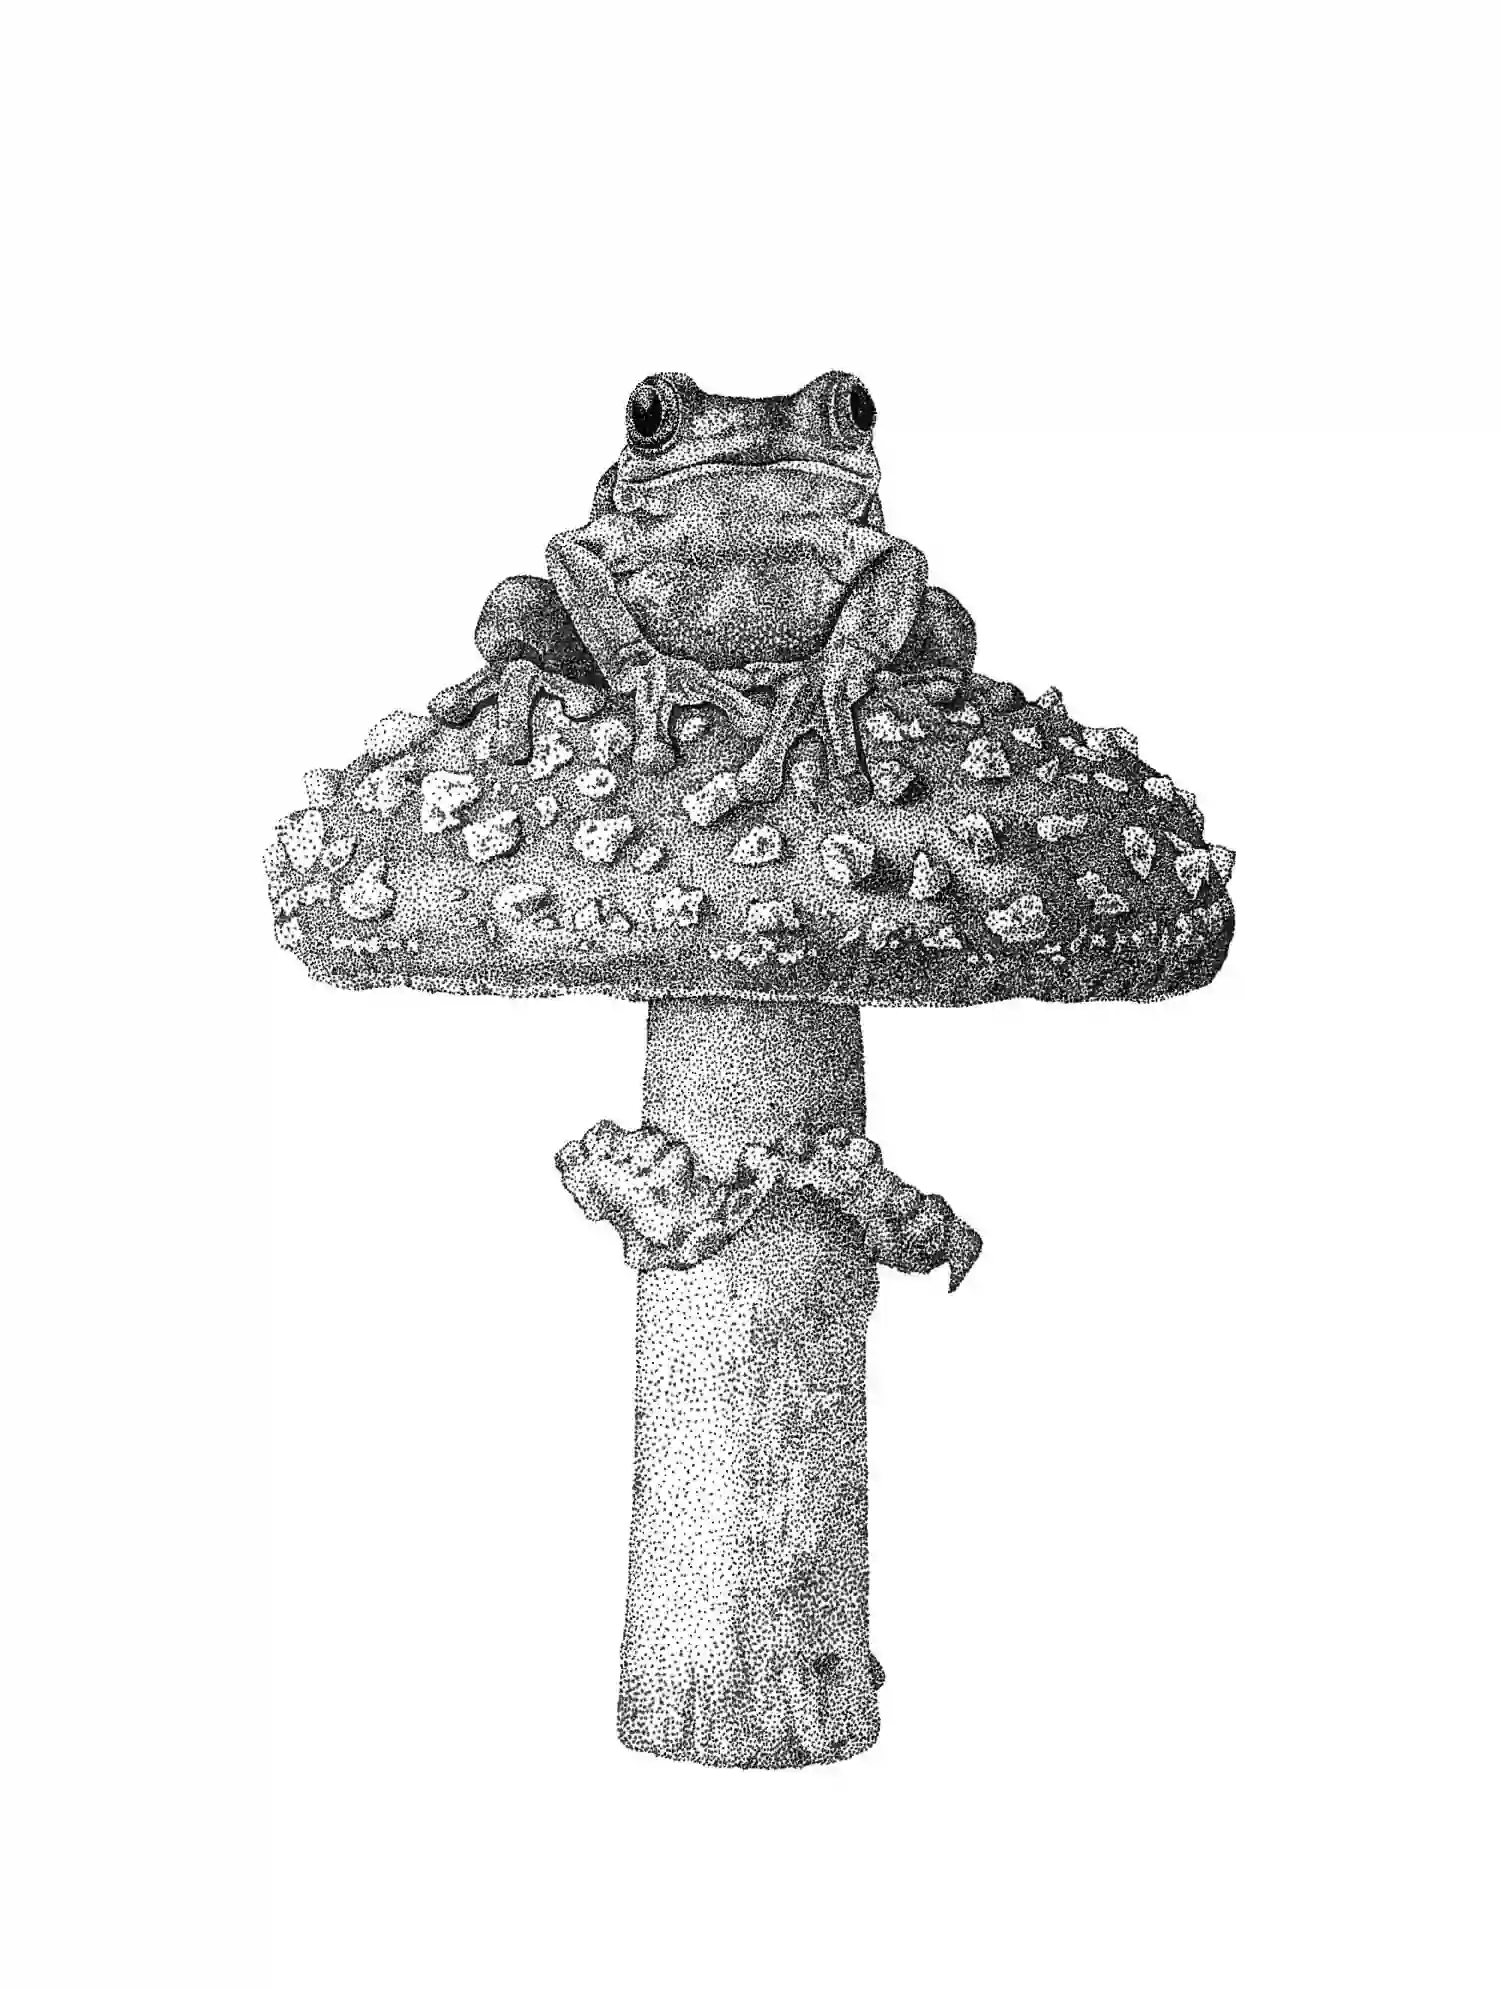 Tree Frog on a Toadstool